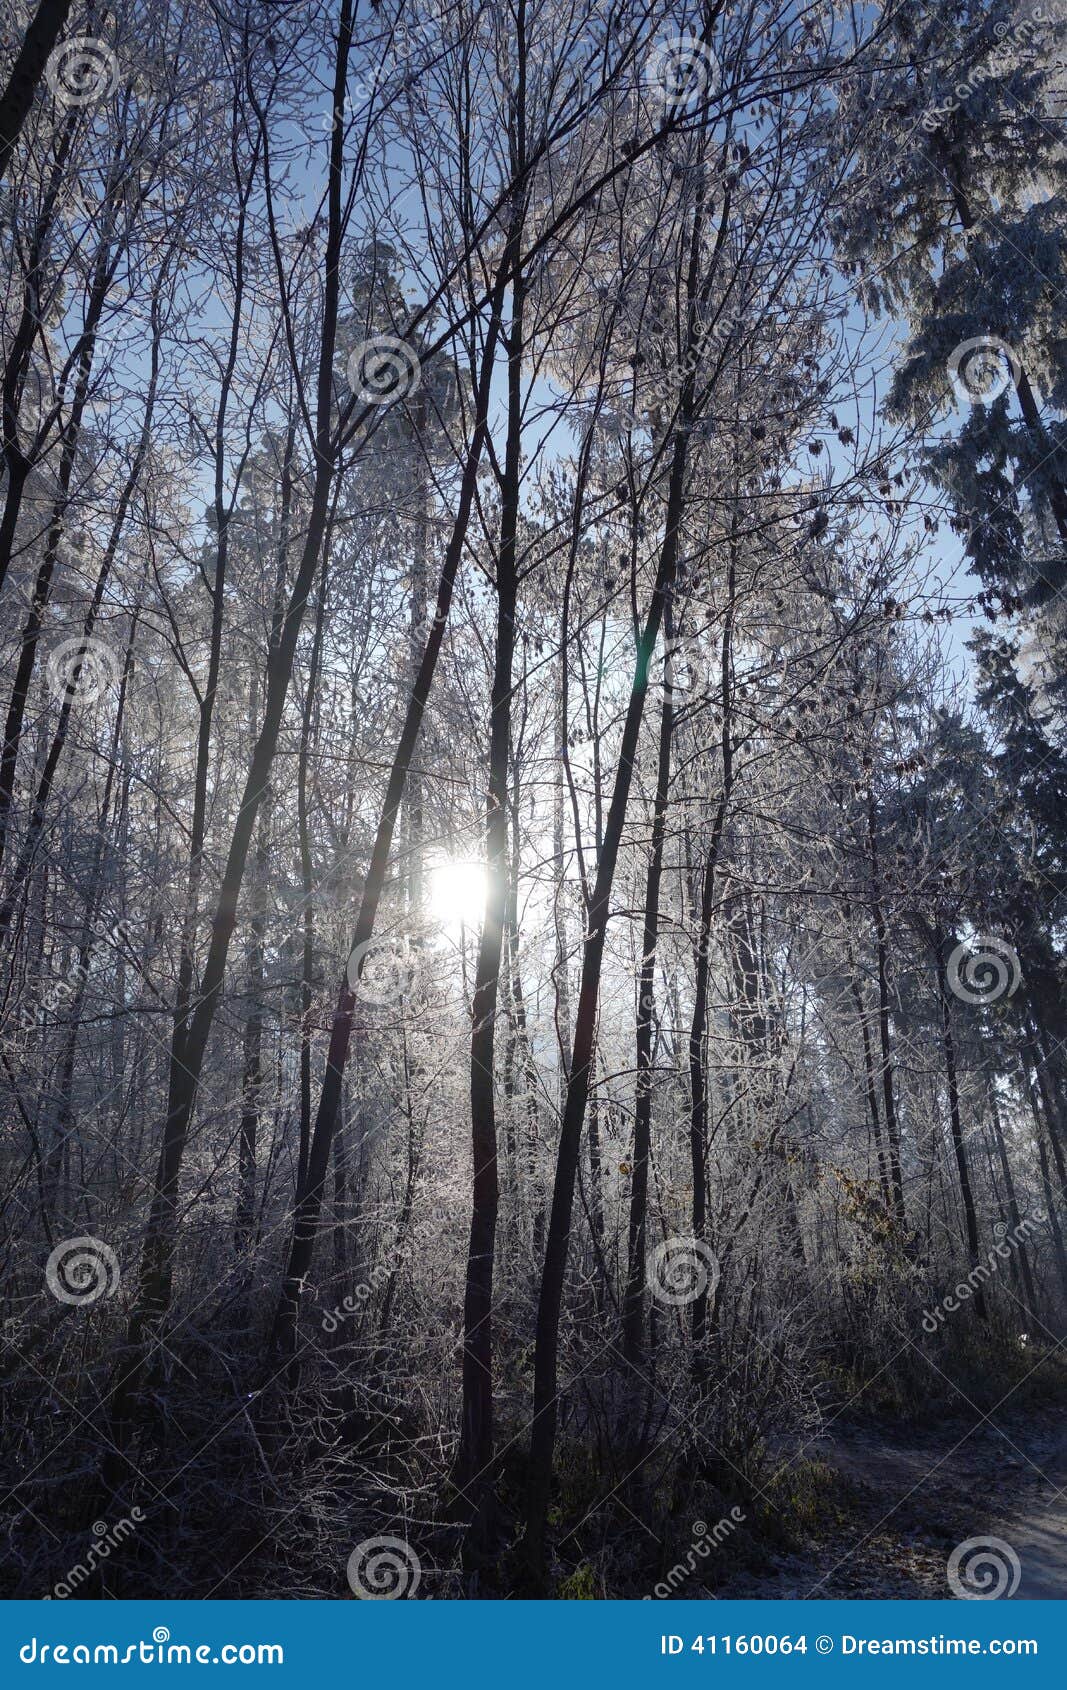 winter forest in backlighting